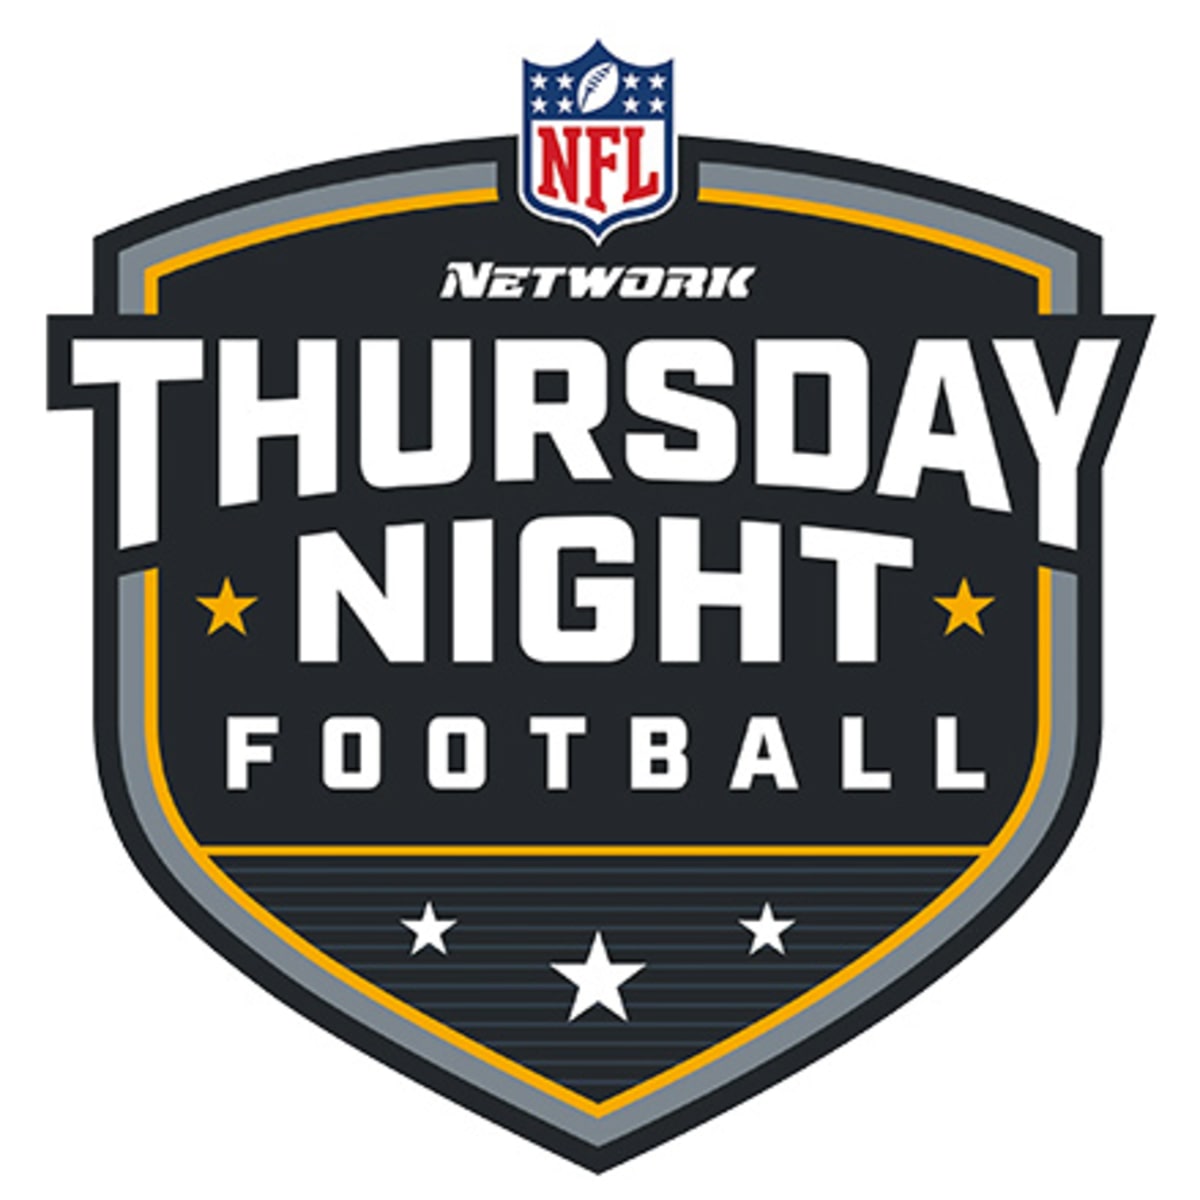 Nbc Sunday Night Football Schedule 2022 Nfl Thursday Night Football Schedule 2021 - Athlonsports.com | Expert  Predictions, Picks, And Previews